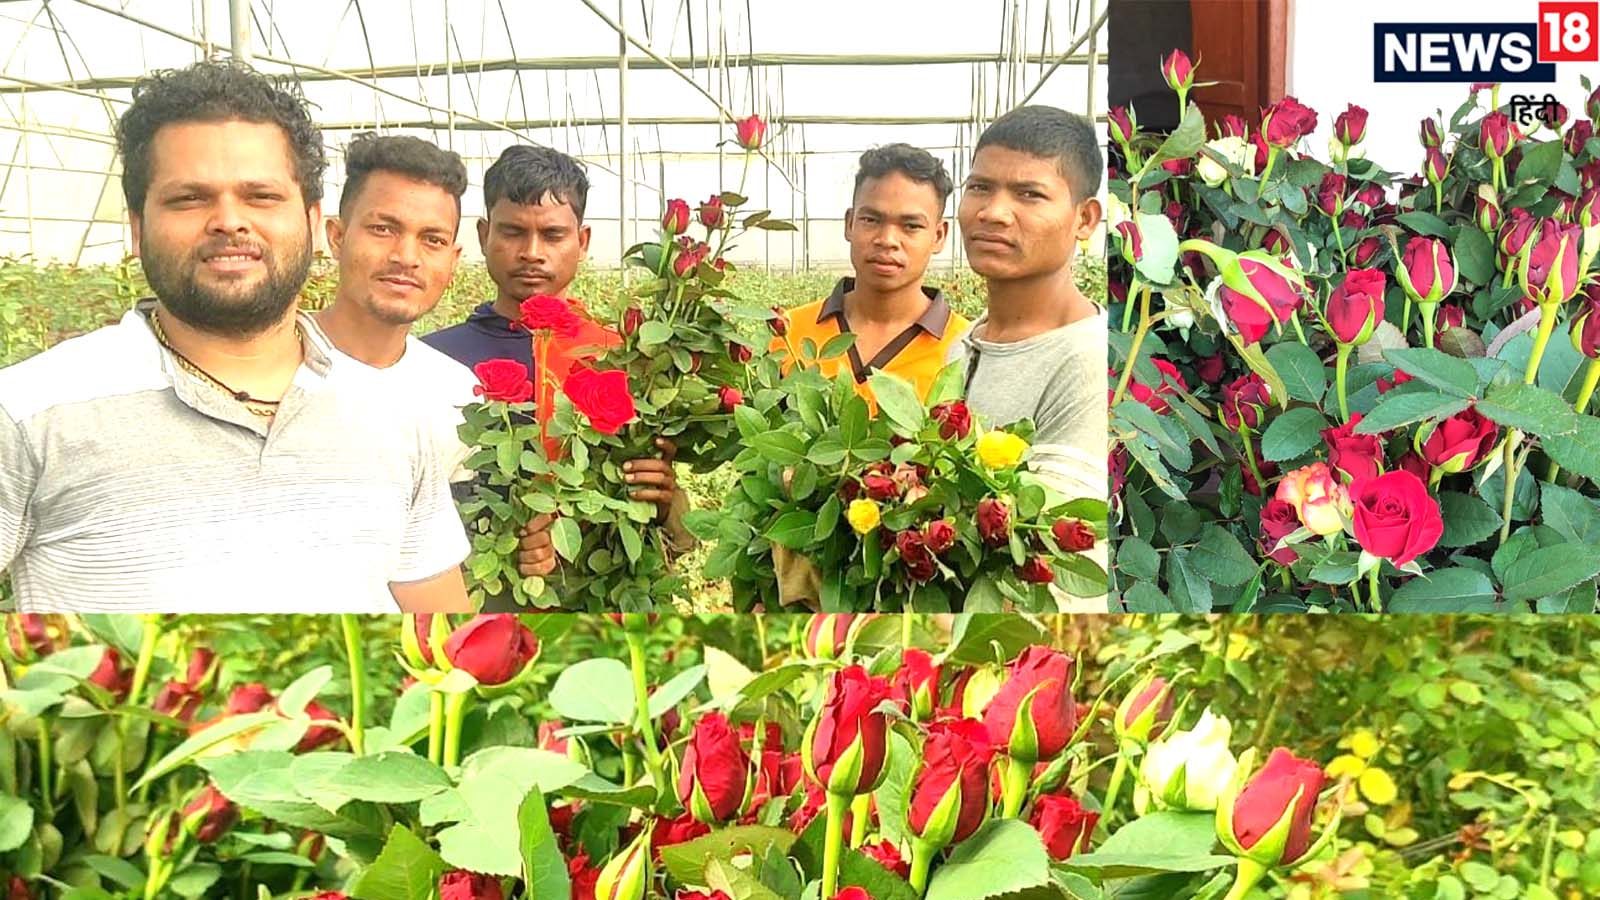 An engineer who left a private job to grow roses happened on Valentine’s Day.